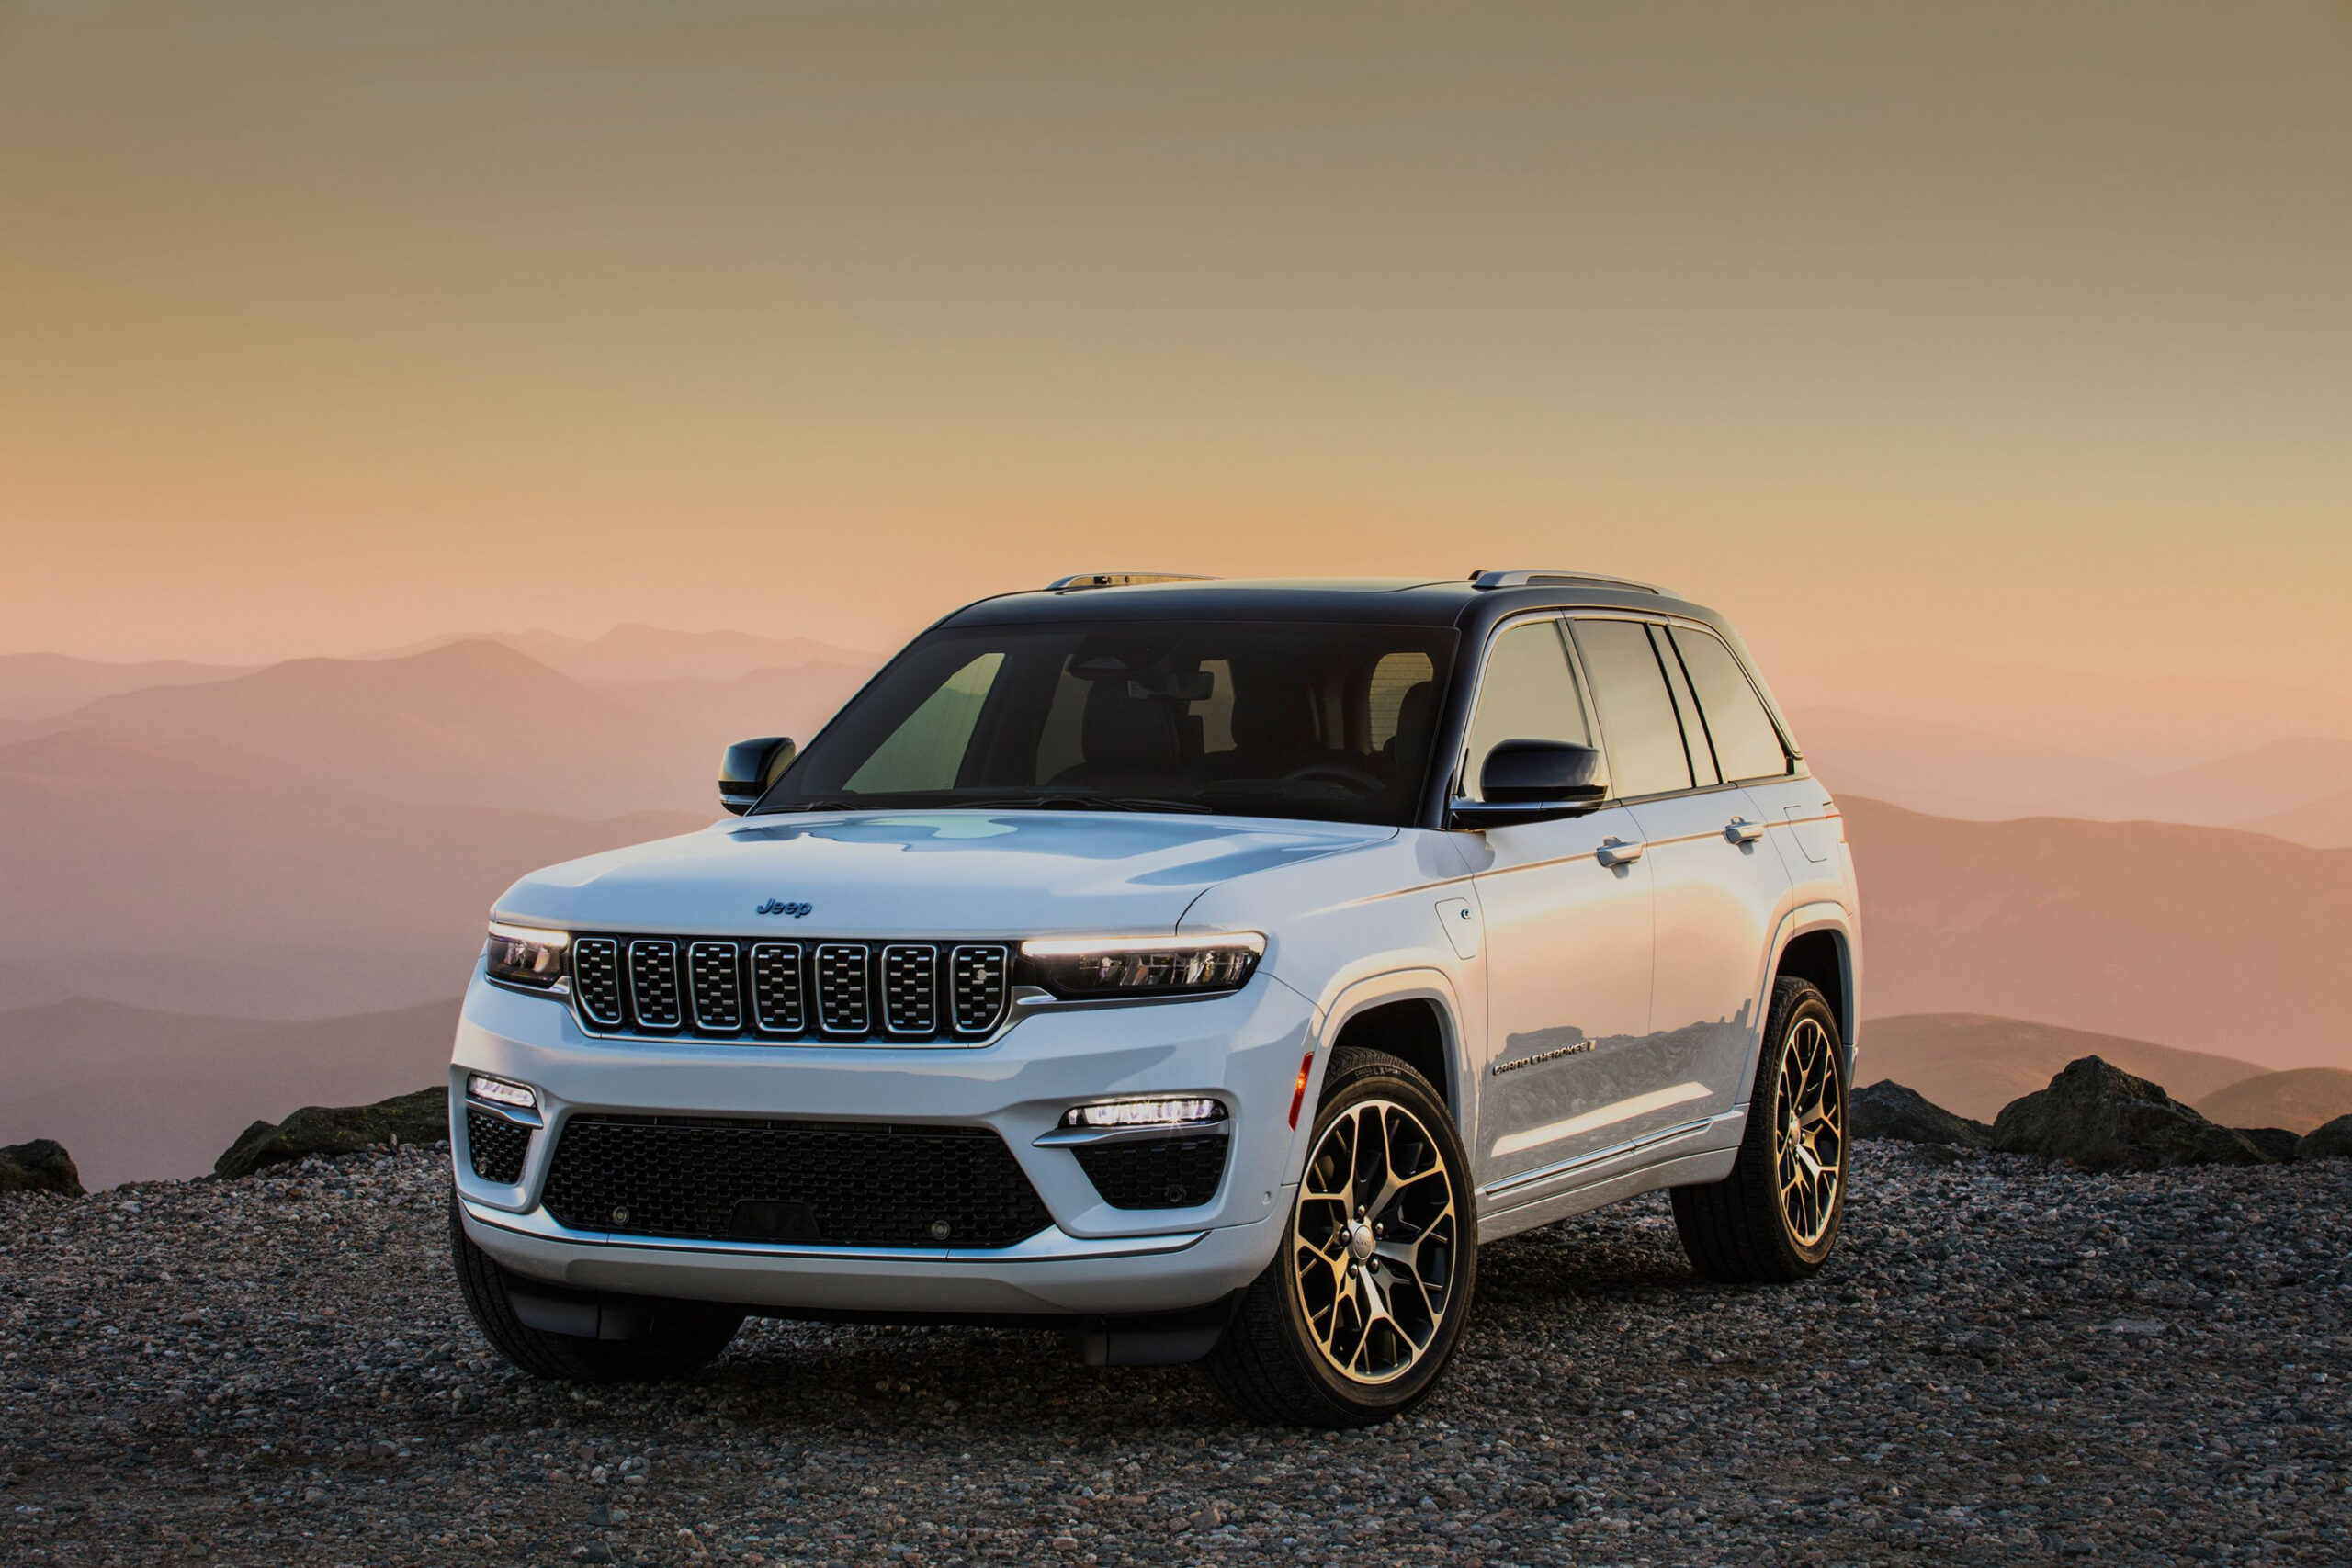 New Model and Performance 2022 jeep grand cherokee pictures